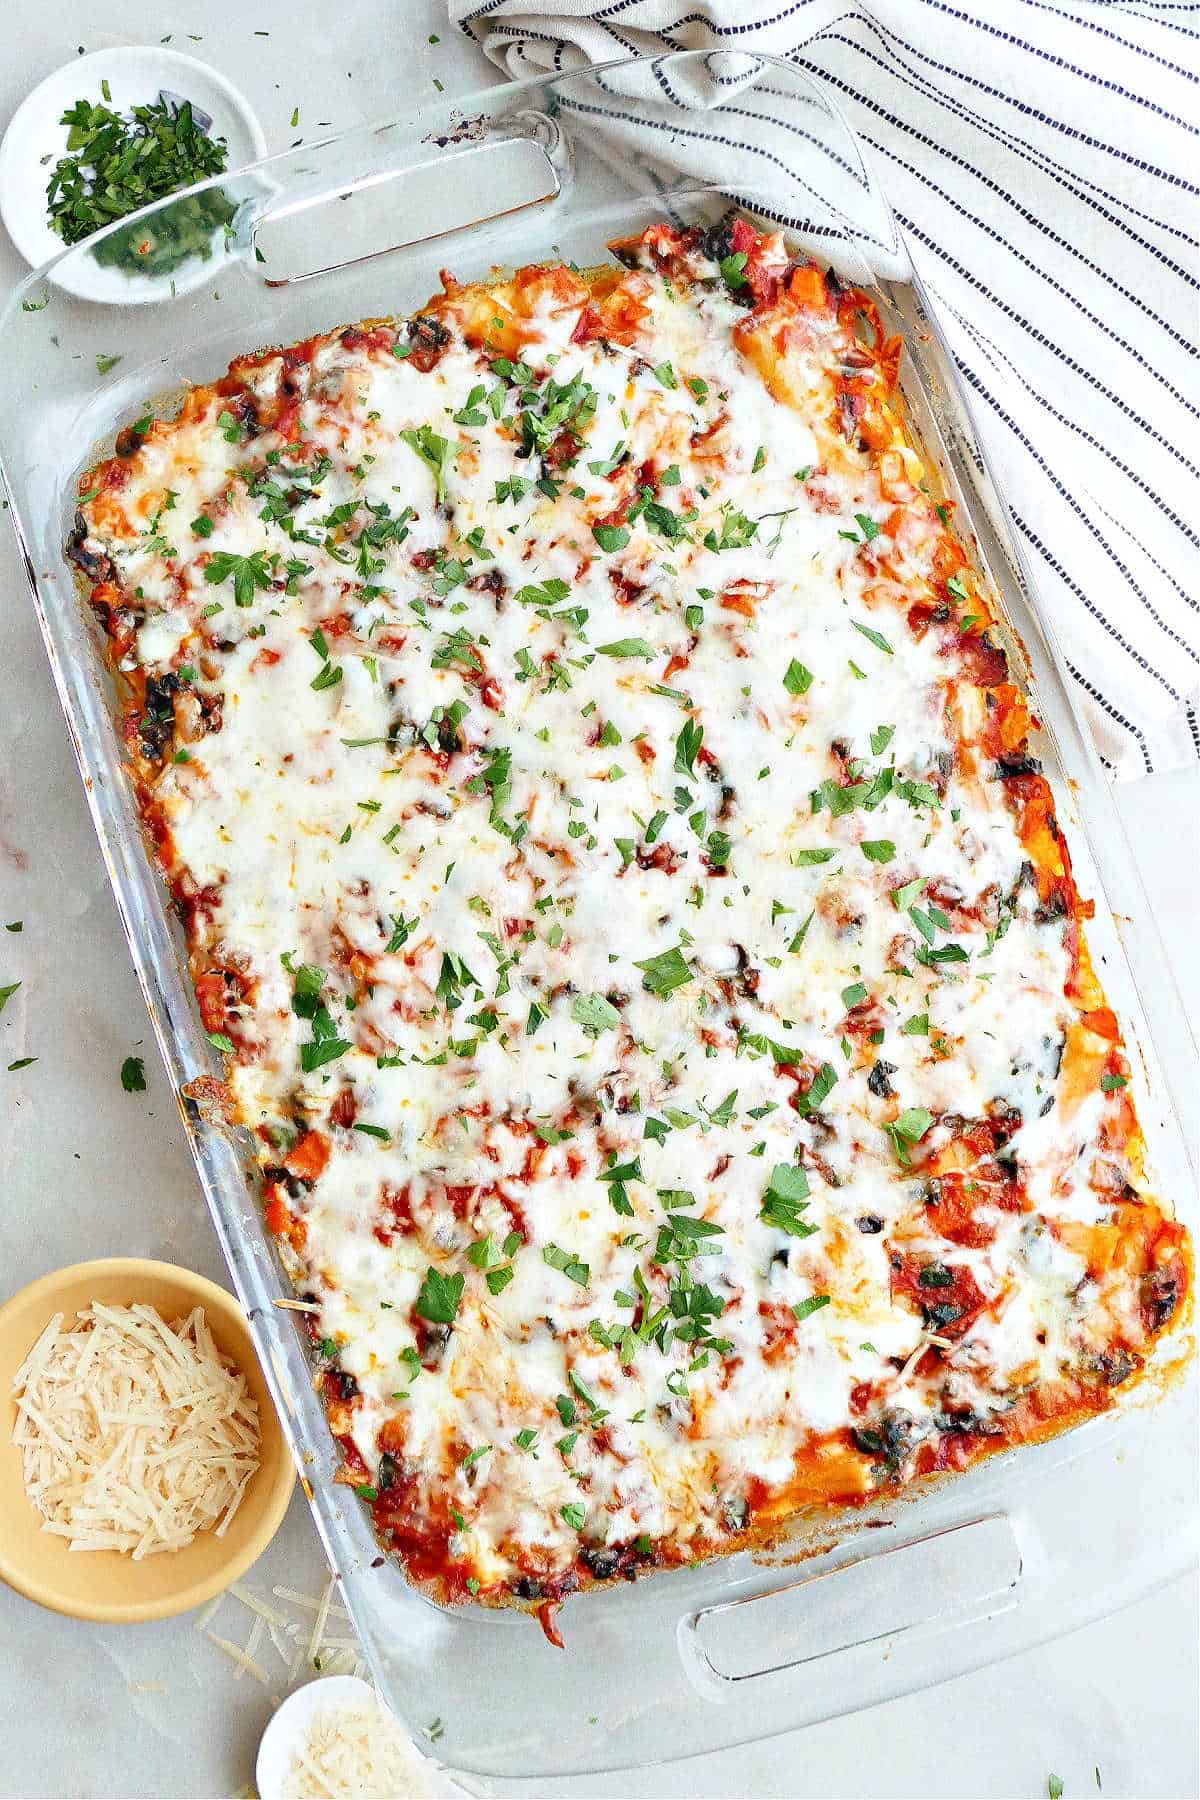 meatless baked ziti topped with fresh parsley in a baking dish on a counter